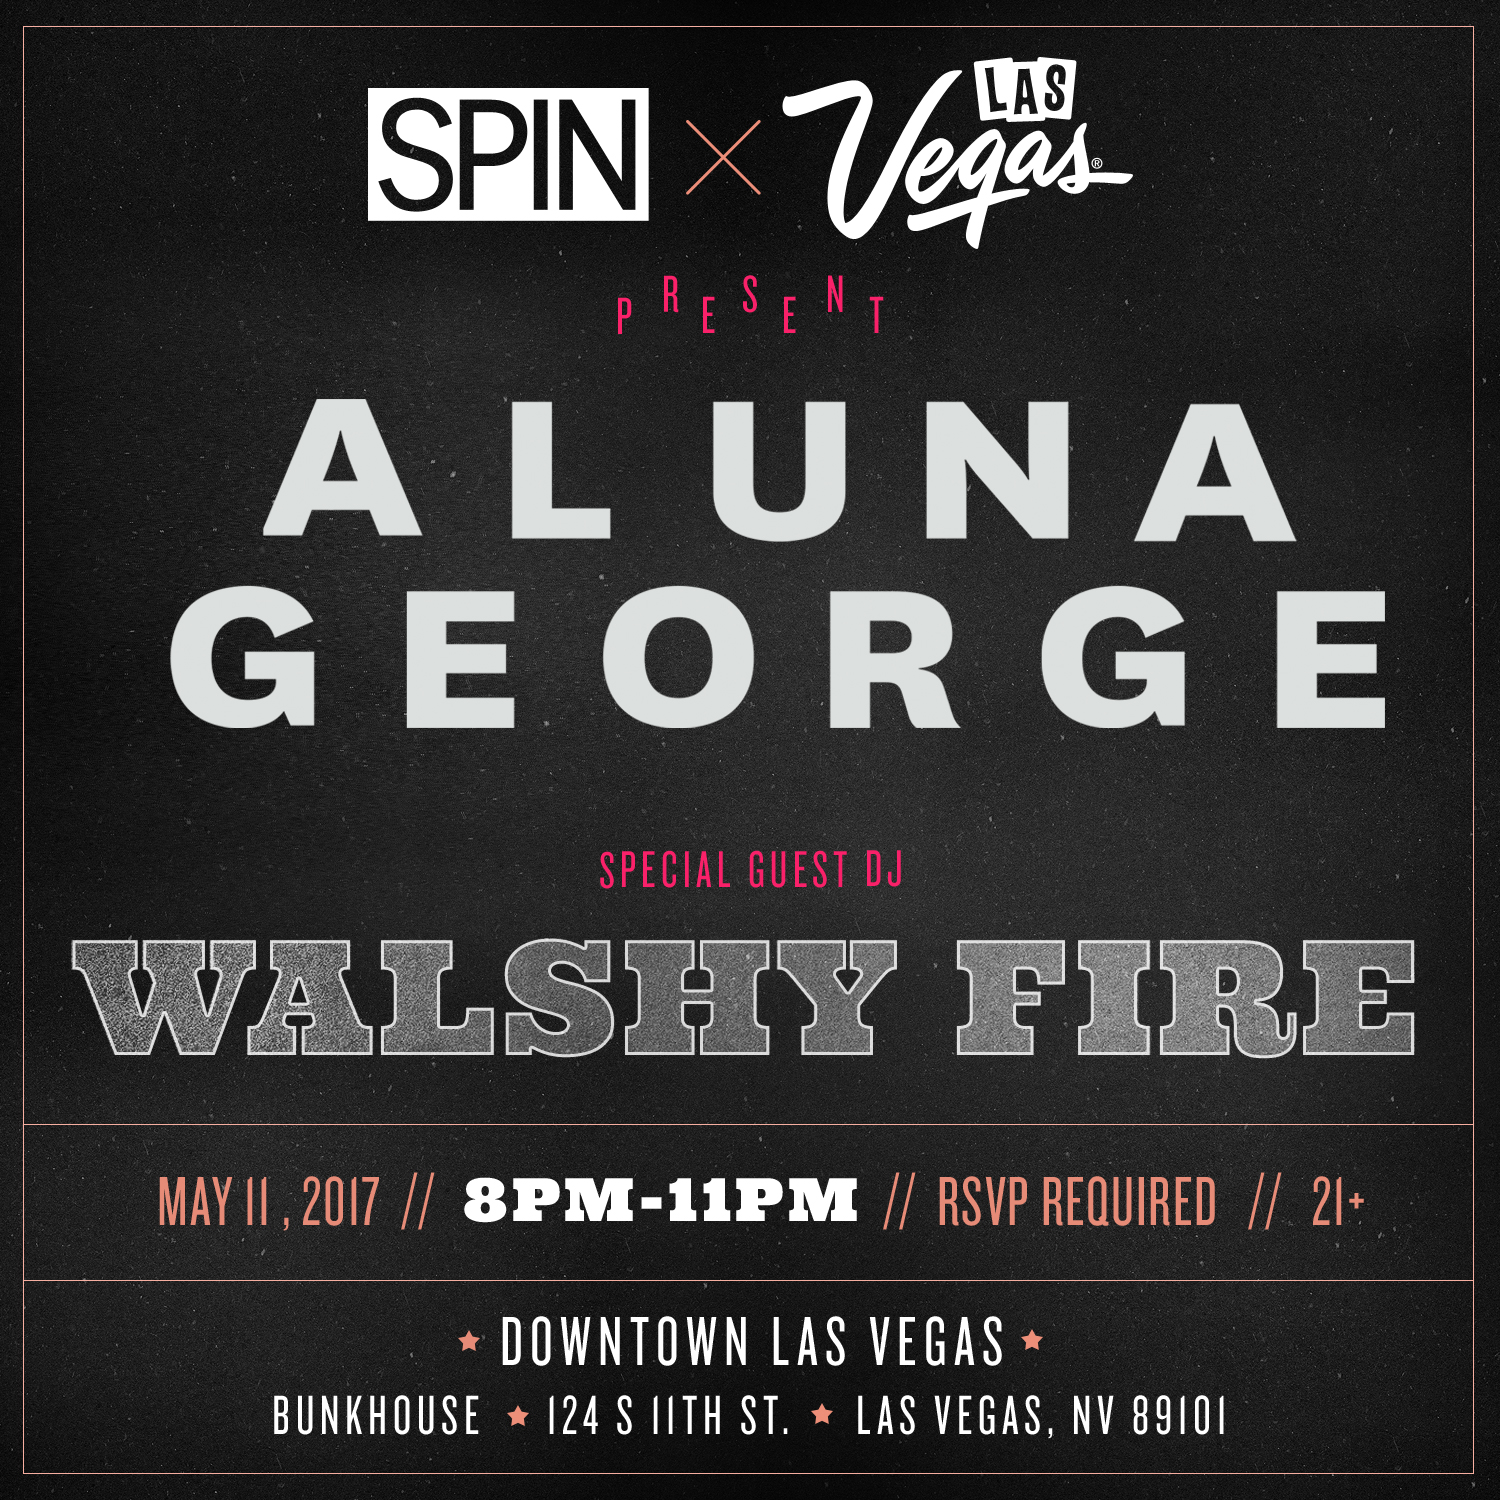 Join SPIN in Las Vegas for a Special Night with AlunaGeorge and Major Lazer's Walshy Fire